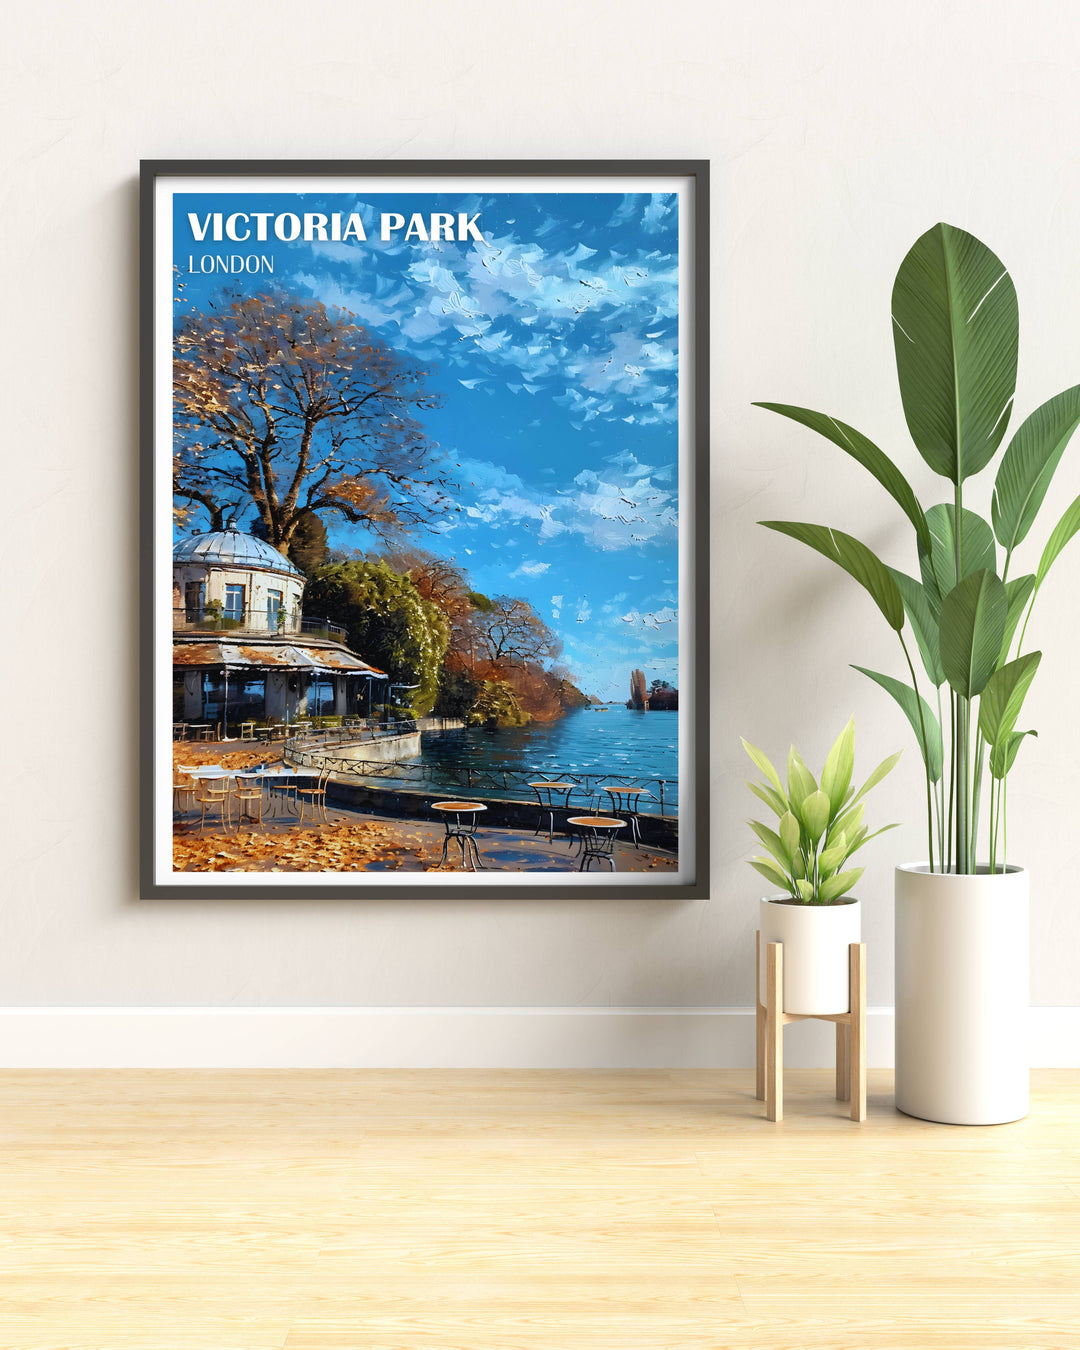 Vintage poster of Victoria Park featuring the Pavilion Café, designed with a retro aesthetic to bring a timeless charm to your home decor.